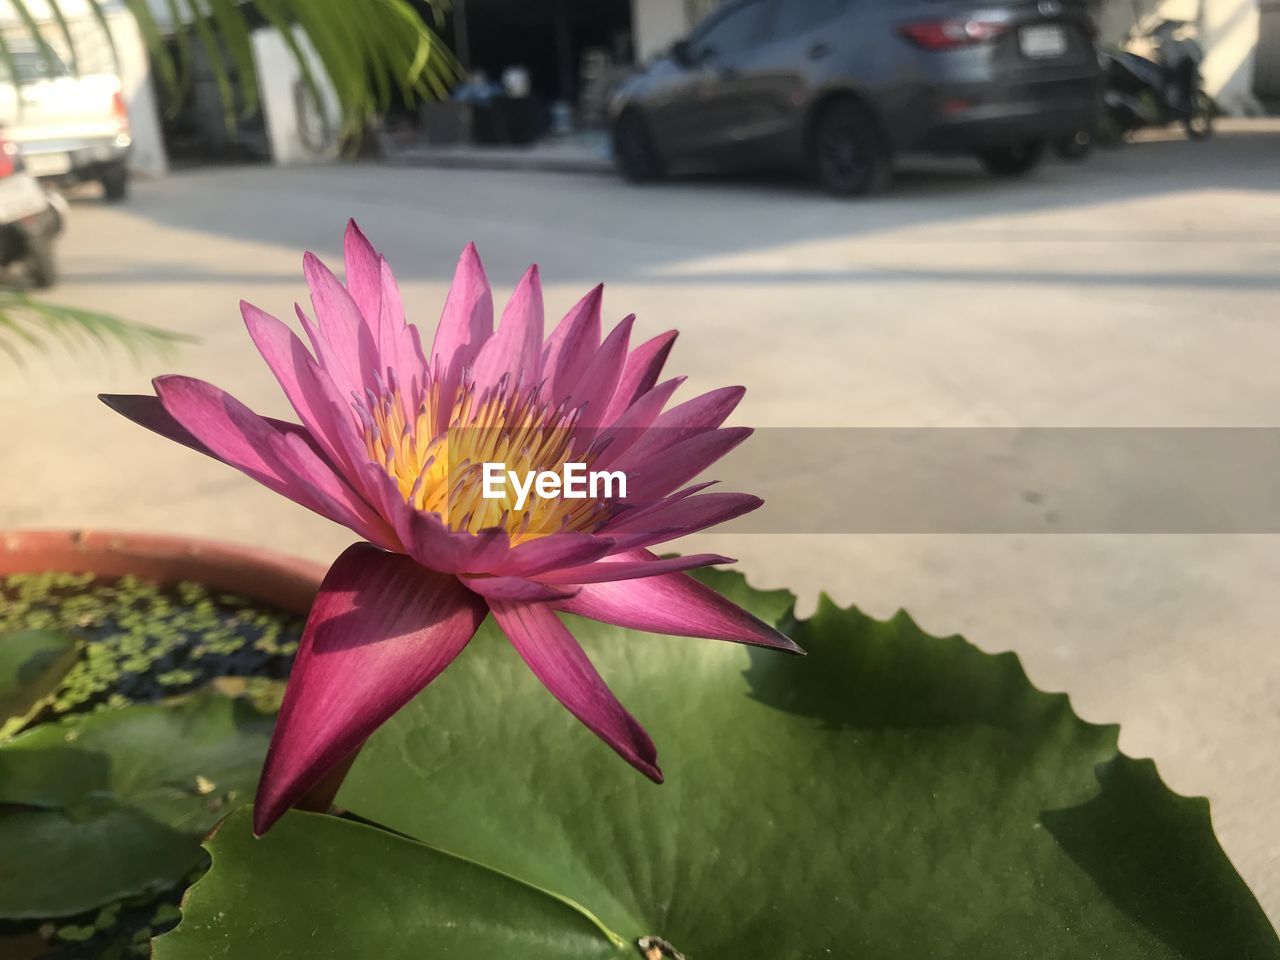 flower, flowering plant, plant, car, freshness, beauty in nature, nature, water lily, leaf, petal, plant part, pink, flower head, transportation, close-up, pond, water, fragility, motor vehicle, city car, mode of transportation, inflorescence, city, lotus water lily, lily, focus on foreground, wheel, outdoors, no people, growth, day, street, sunlight, land vehicle, tropical climate, pollen